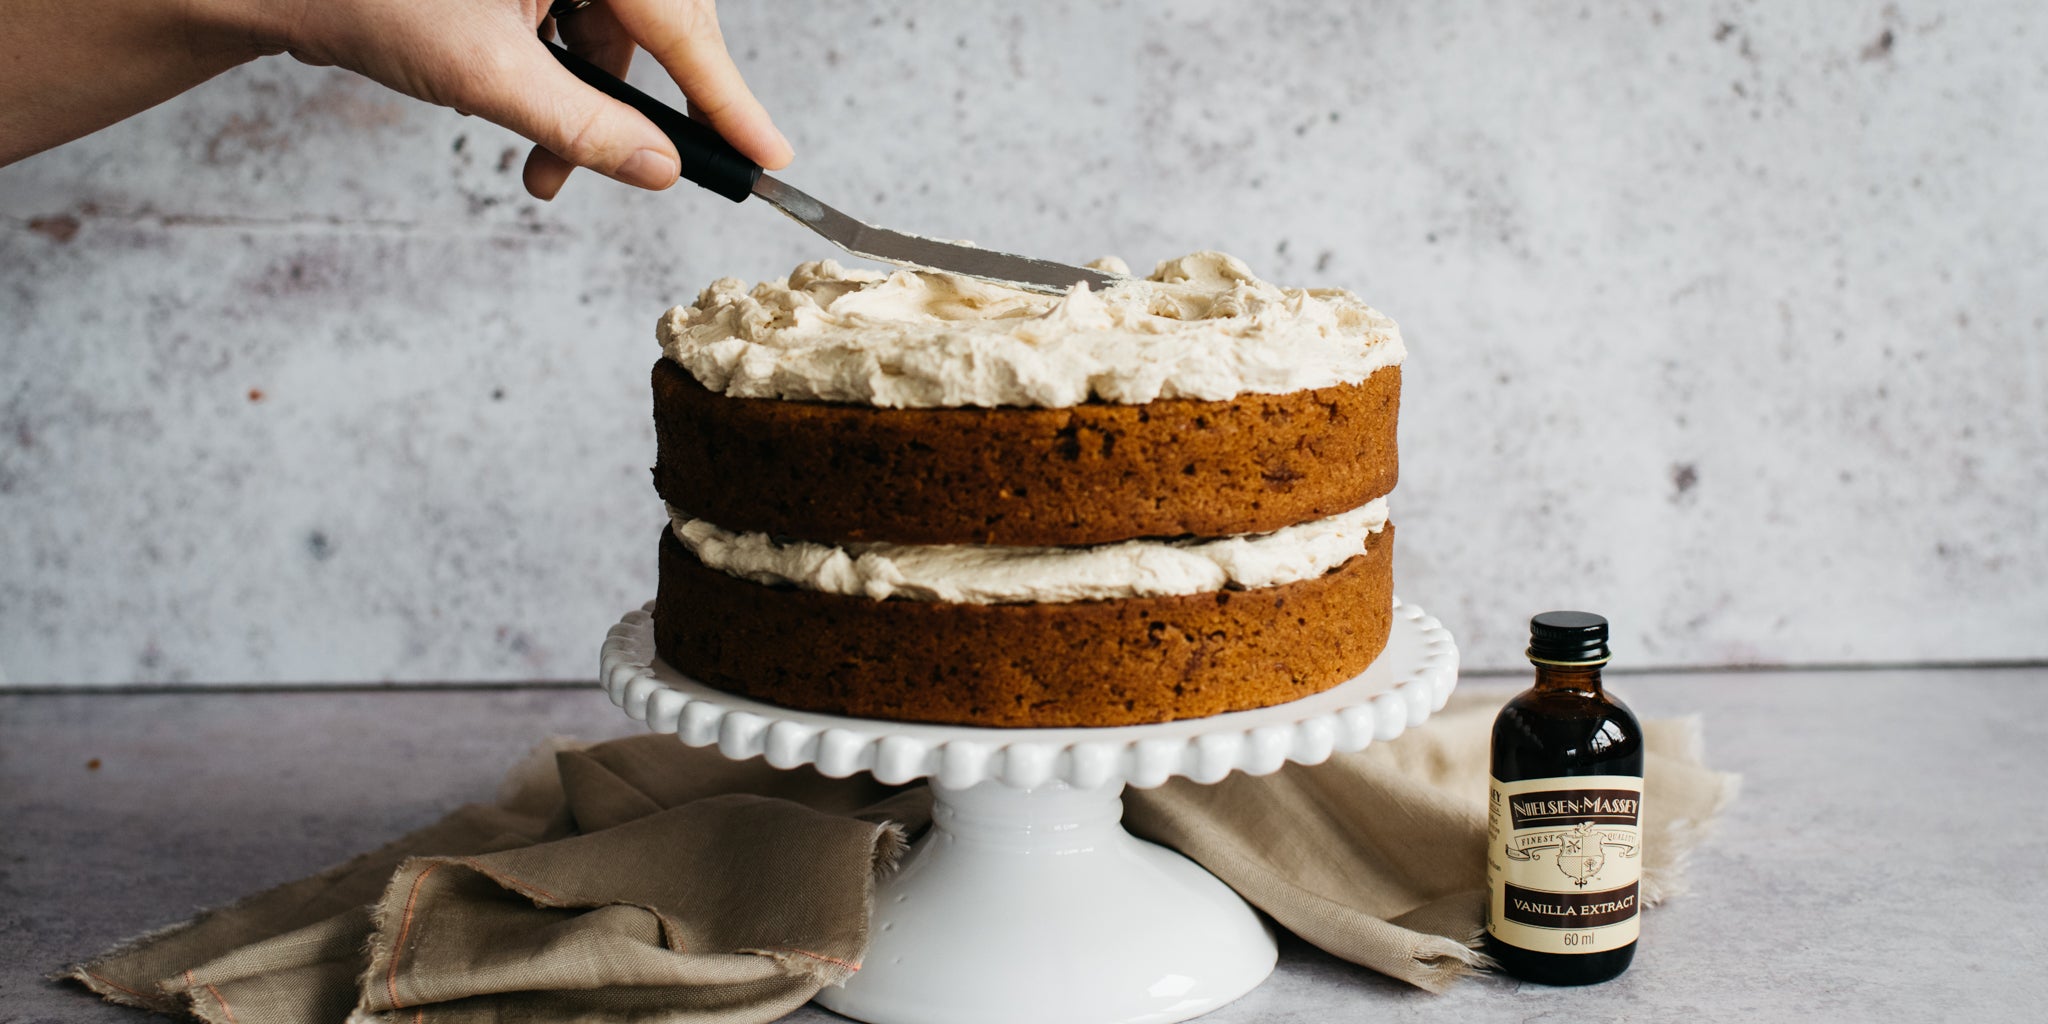 Vegan Carrot Cake being sliced into using a cake knife, next to a bottle of Nielsen-Massey vanilla extract